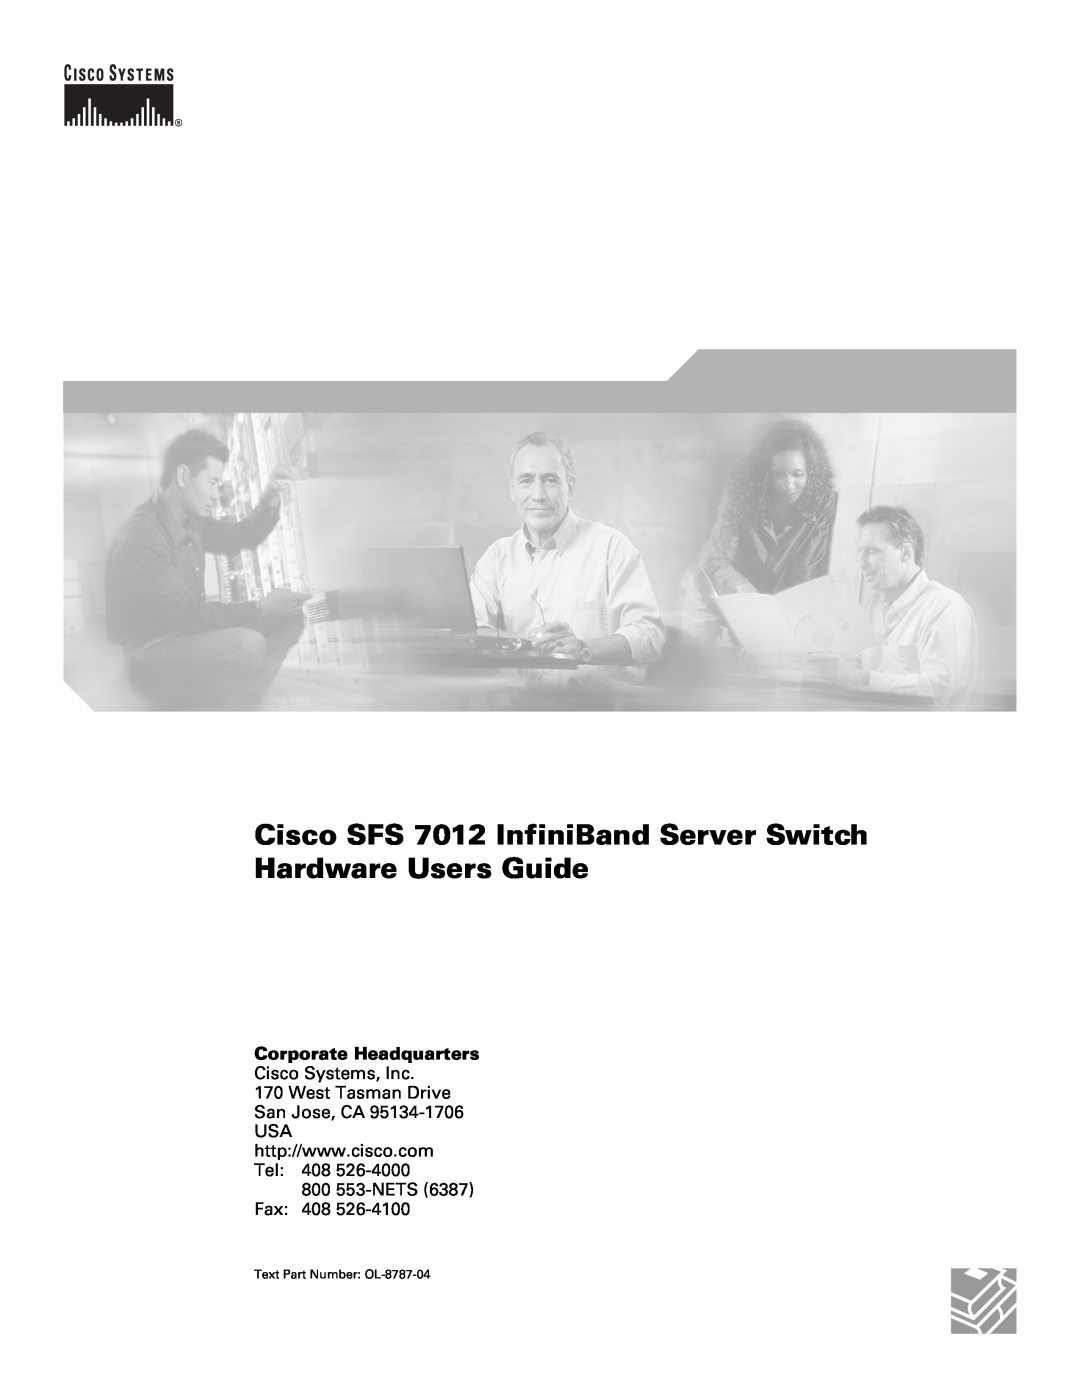 Cisco Systems manual Cisco SFS 7012 InfiniBand Server Switch Hardware Users Guide, Corporate Headquarters 